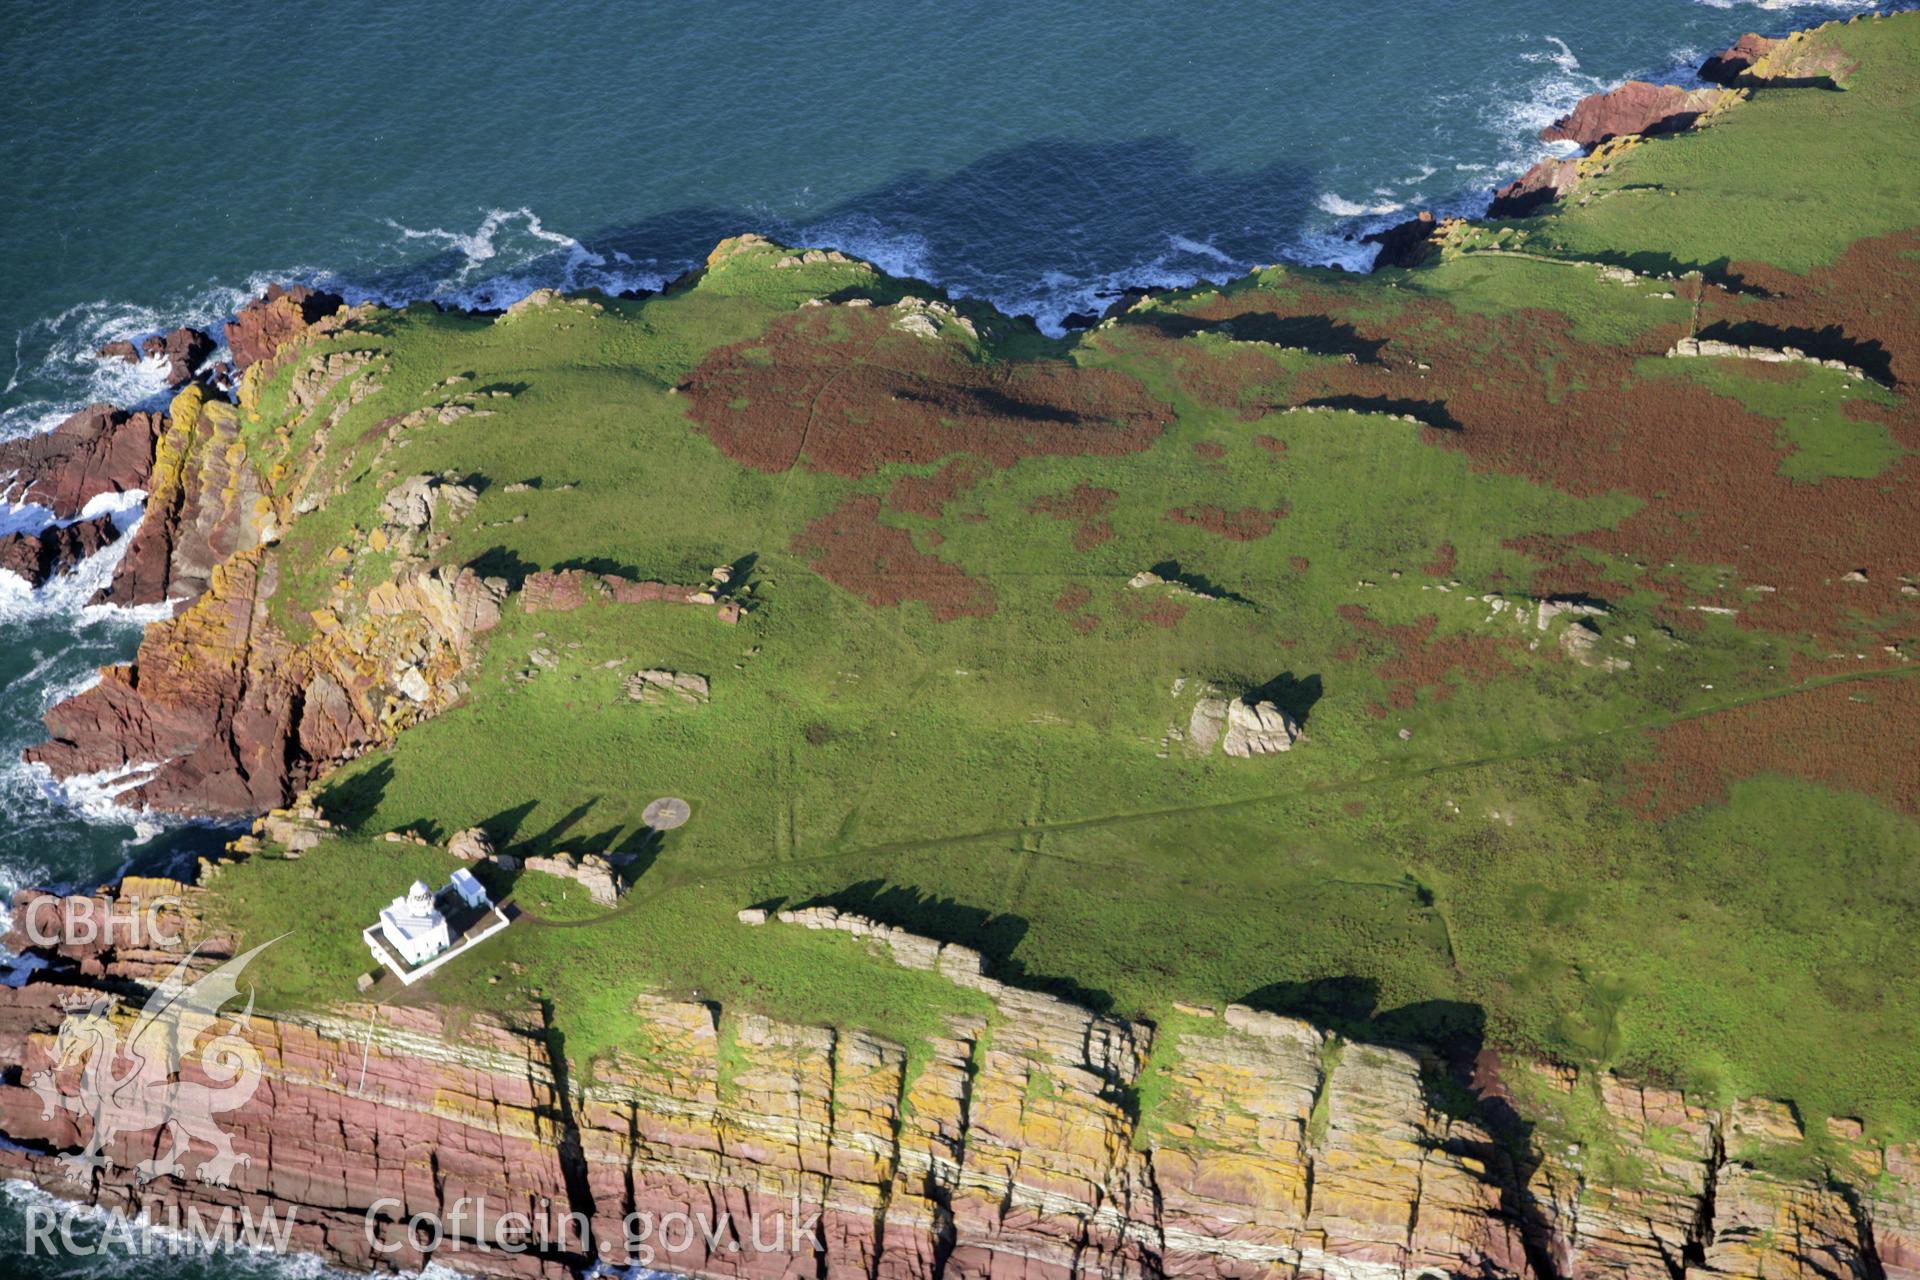 RCAHMW colour oblique photograph of Skokholm Island lighthouse, viewed from the south. Taken by O. Davies & T. Driver on 22/11/2013.